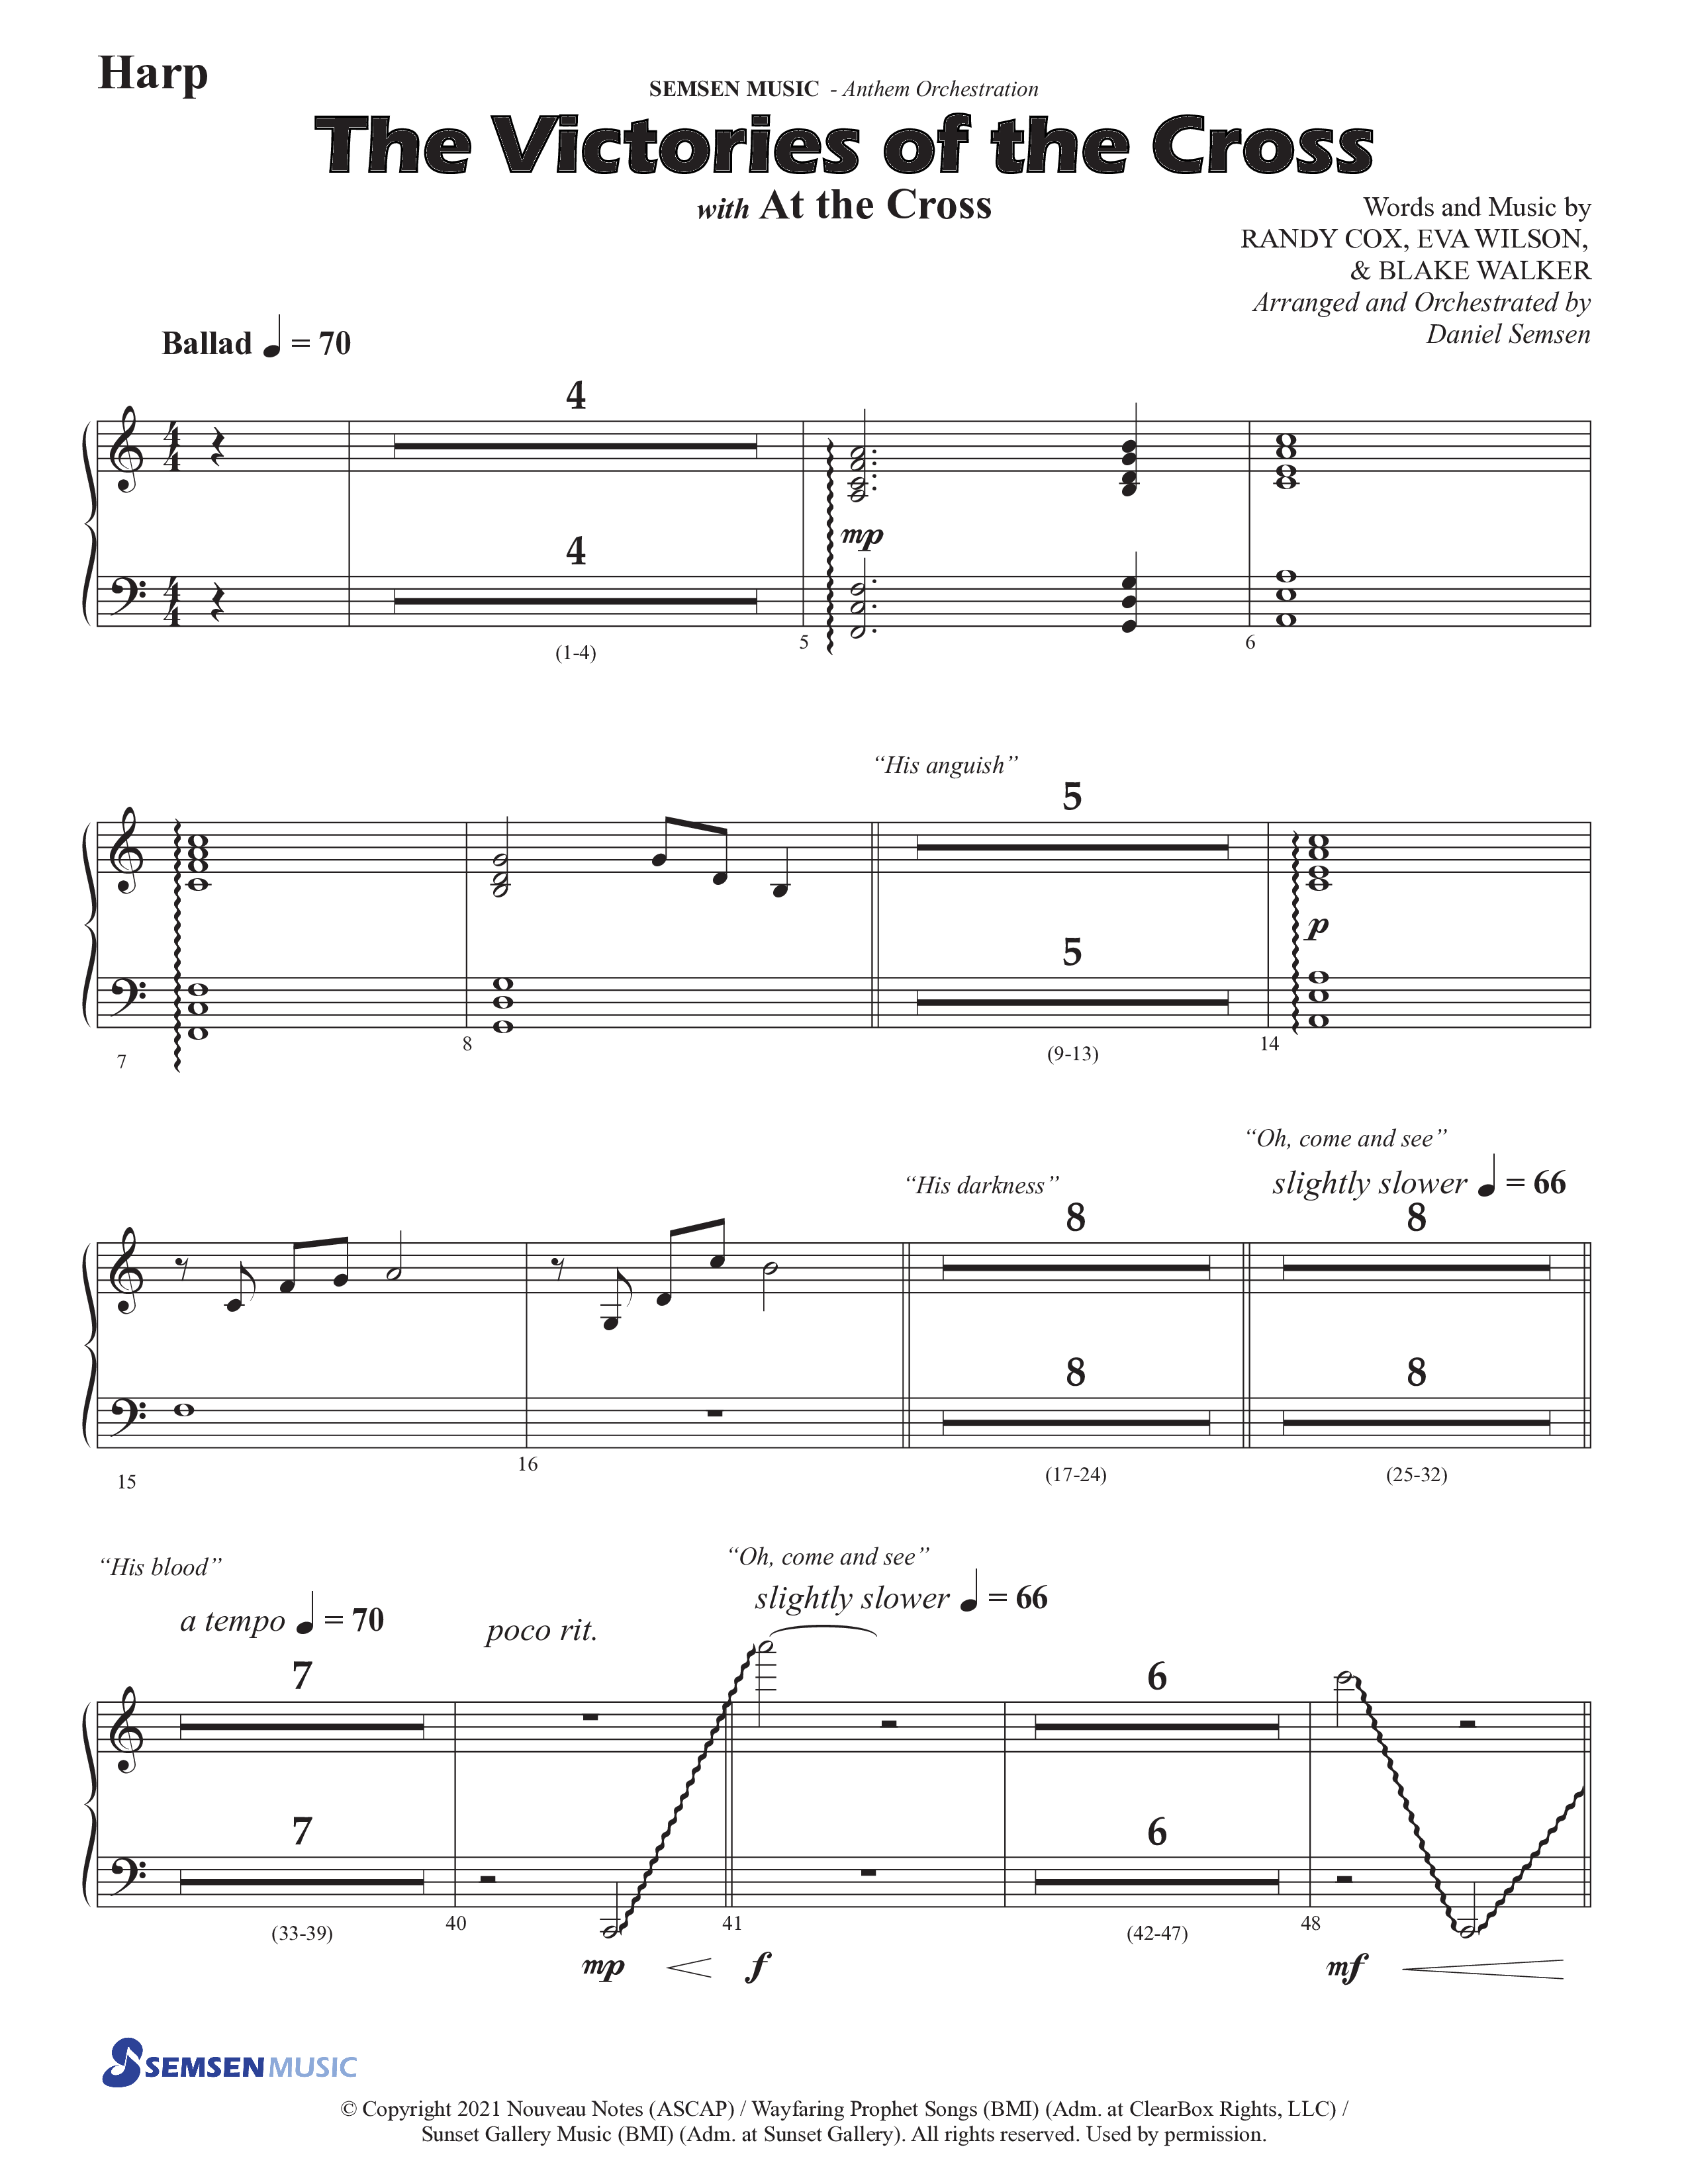 The Victories Of The Cross (with At The Cross) (Choral Anthem SATB) Harp (Semsen Music / Arr. Daniel Semsen)